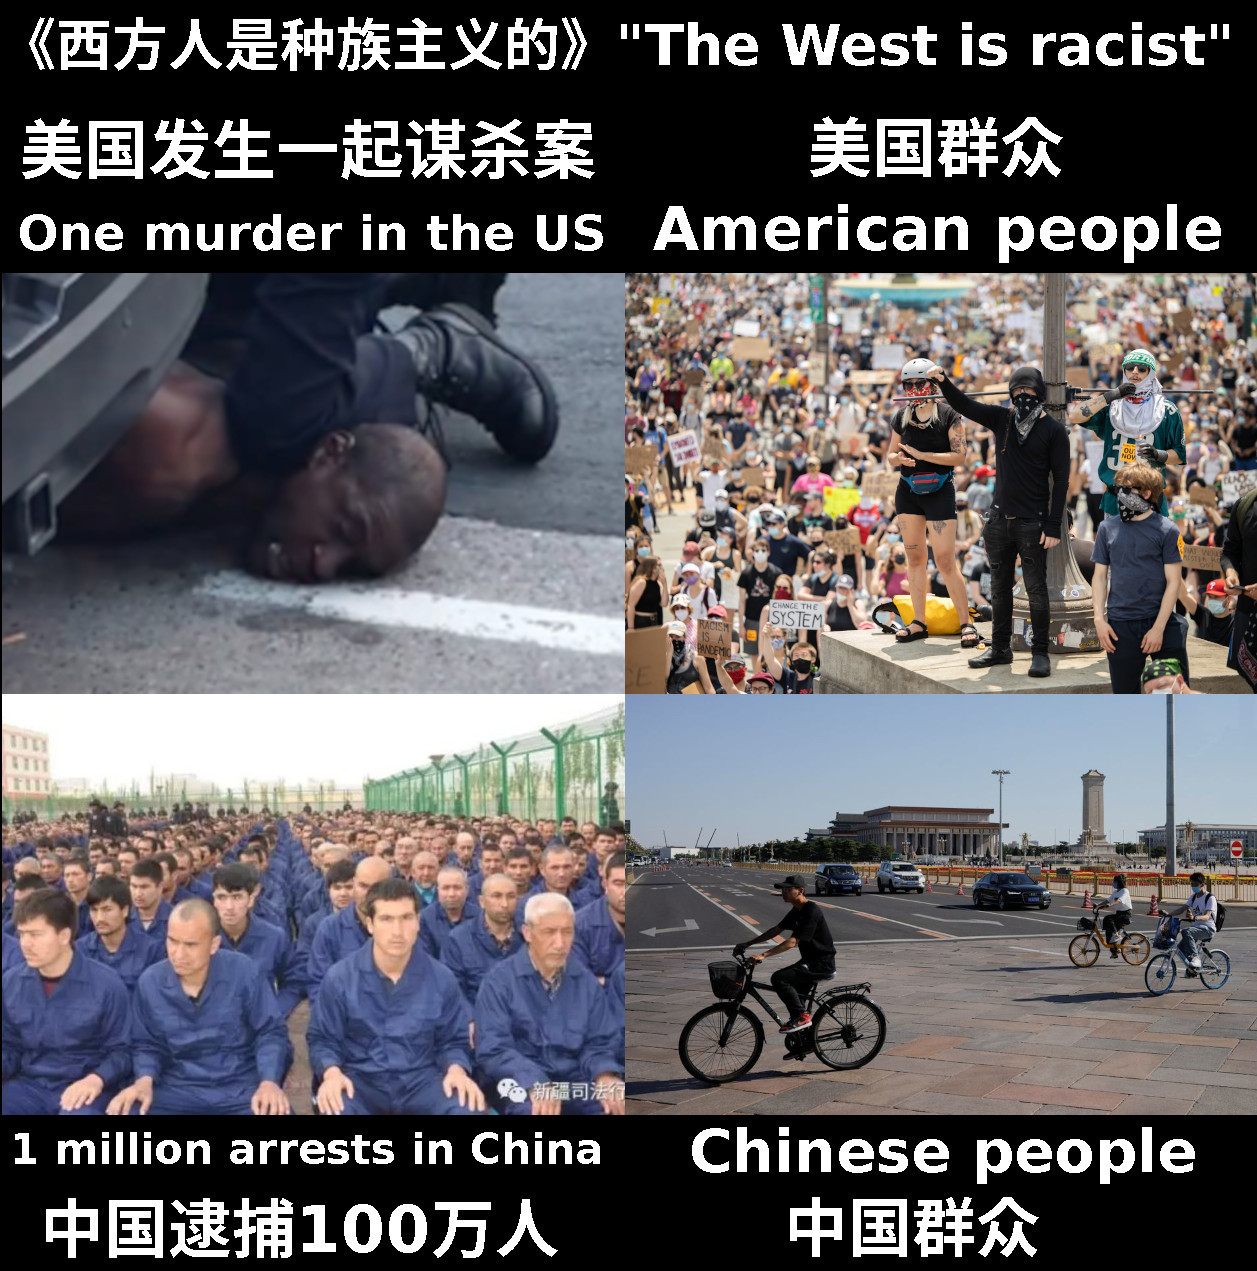 Racism in the West vs China George Floyd vs Xinjiang